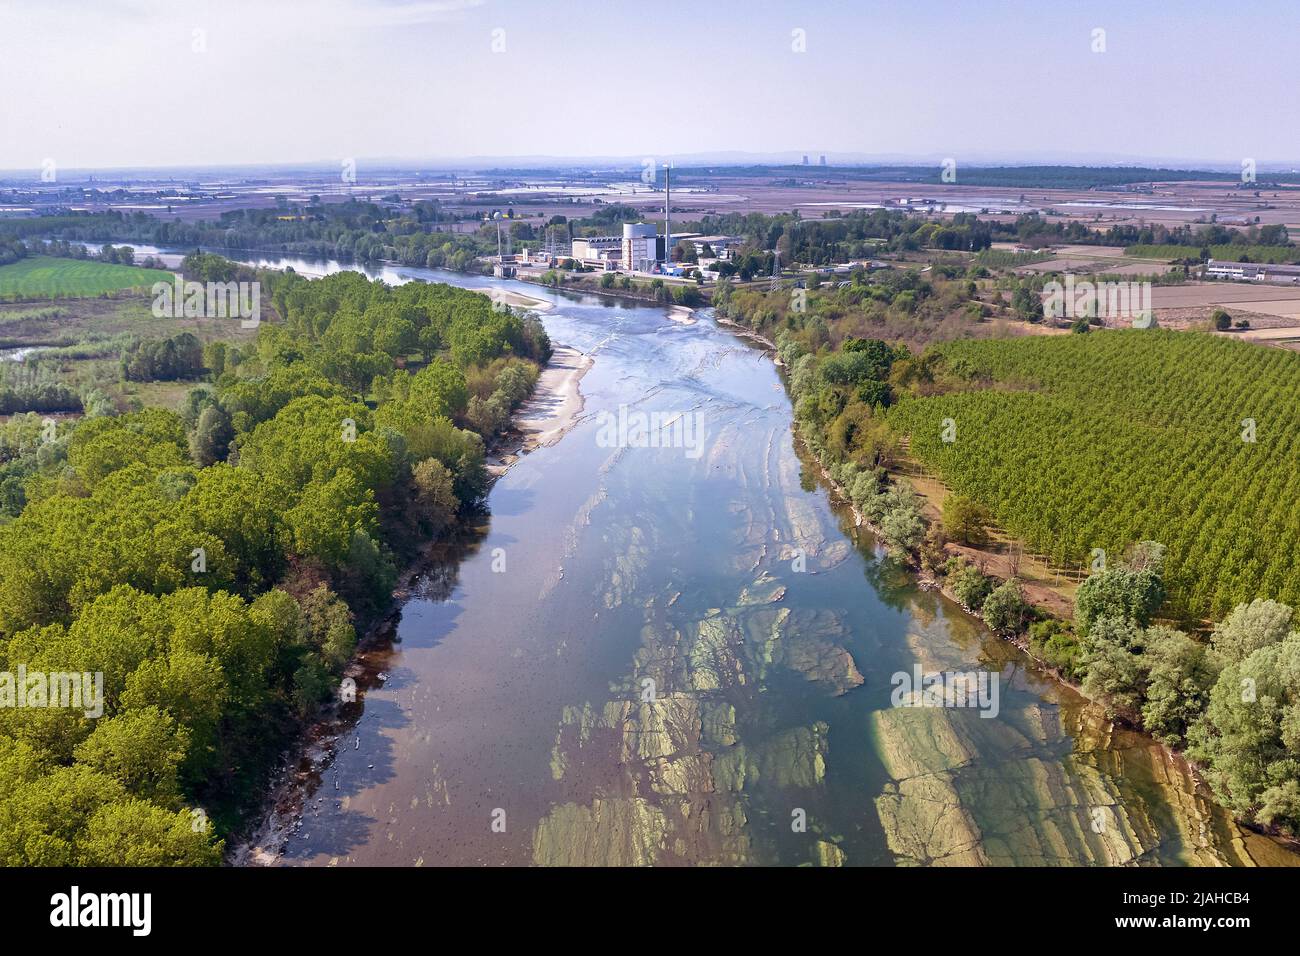 Aerial view of the decommissioned Trino Vercellese nuclear power plant built on the Po River. Trino, Italy - April 2021 Stock Photo